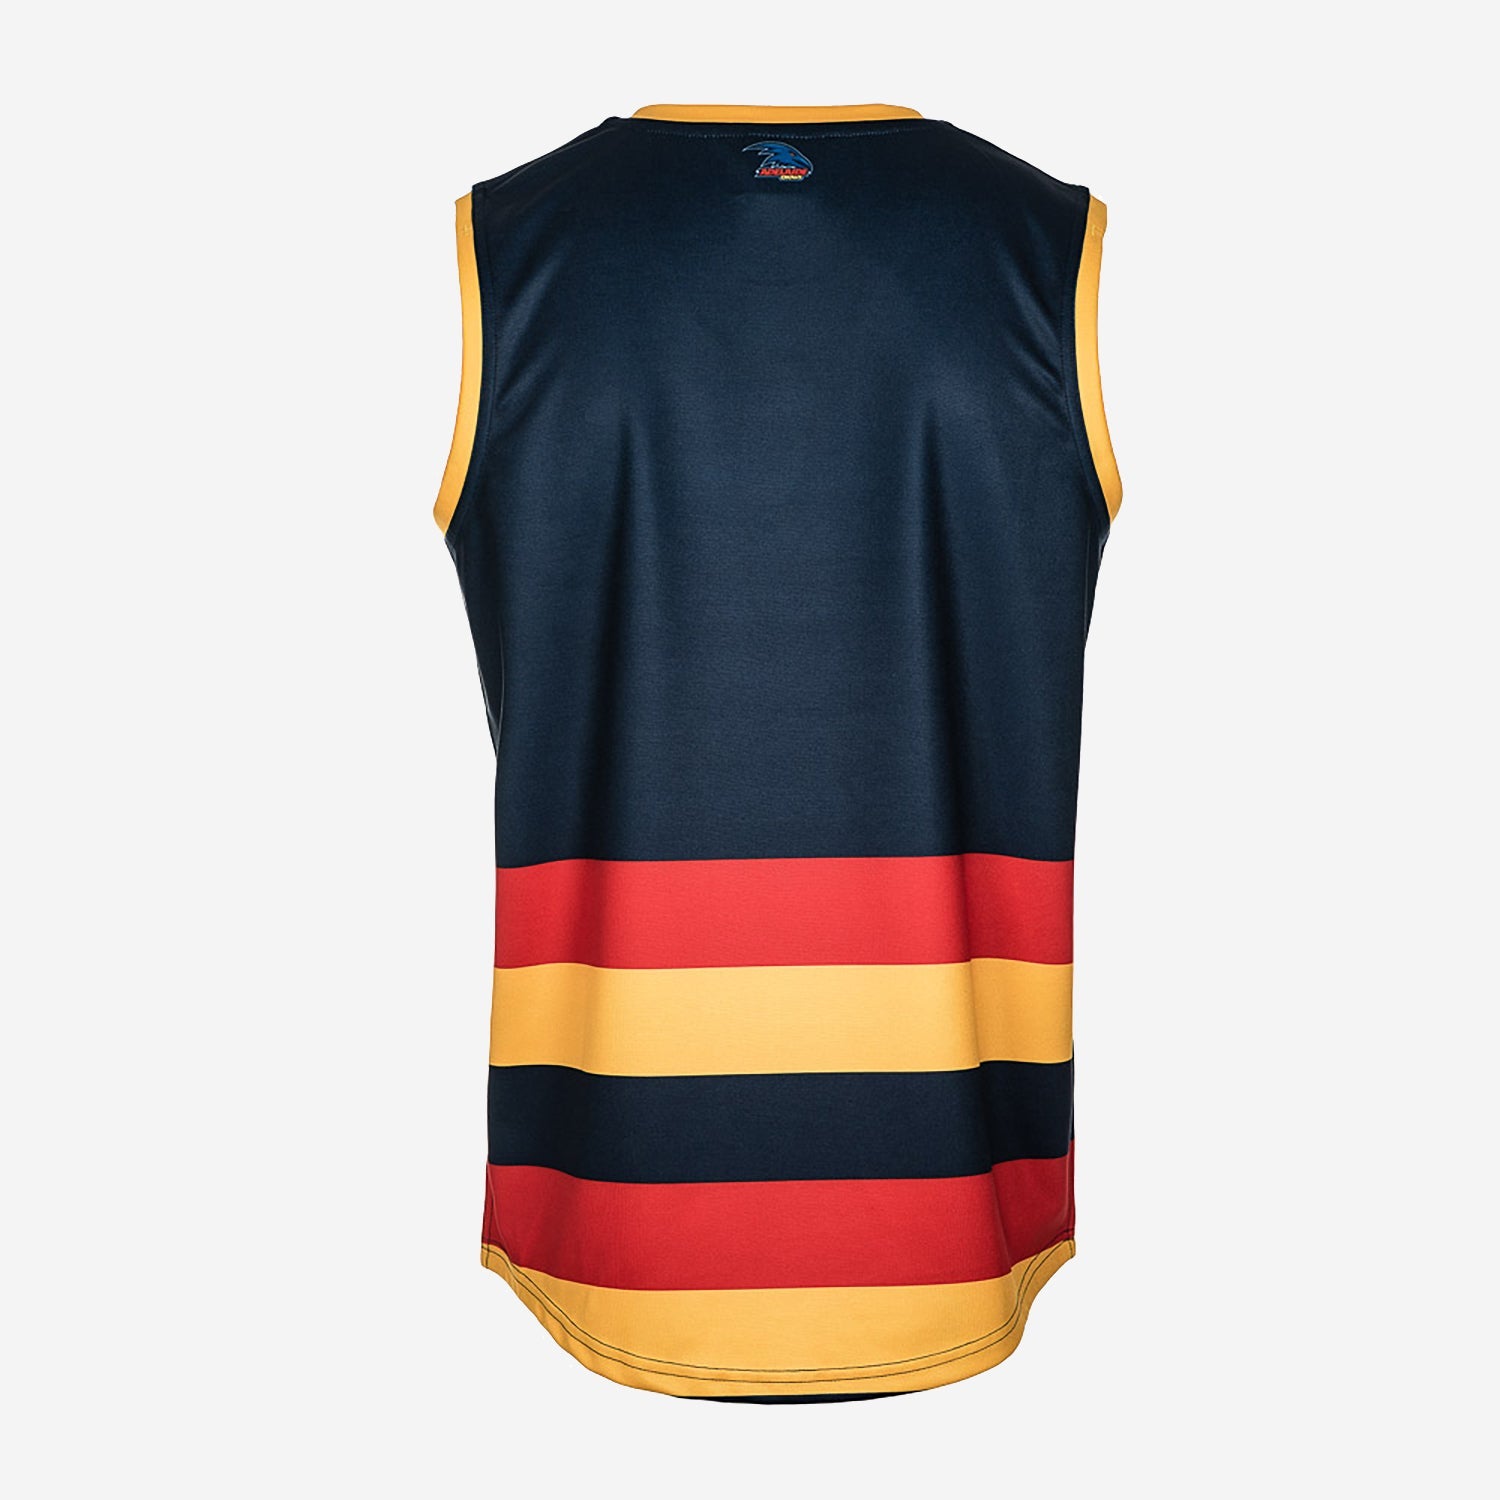 Adelaide Crows - AFL Replica Adult Guernsey - The Cricket Warehouse